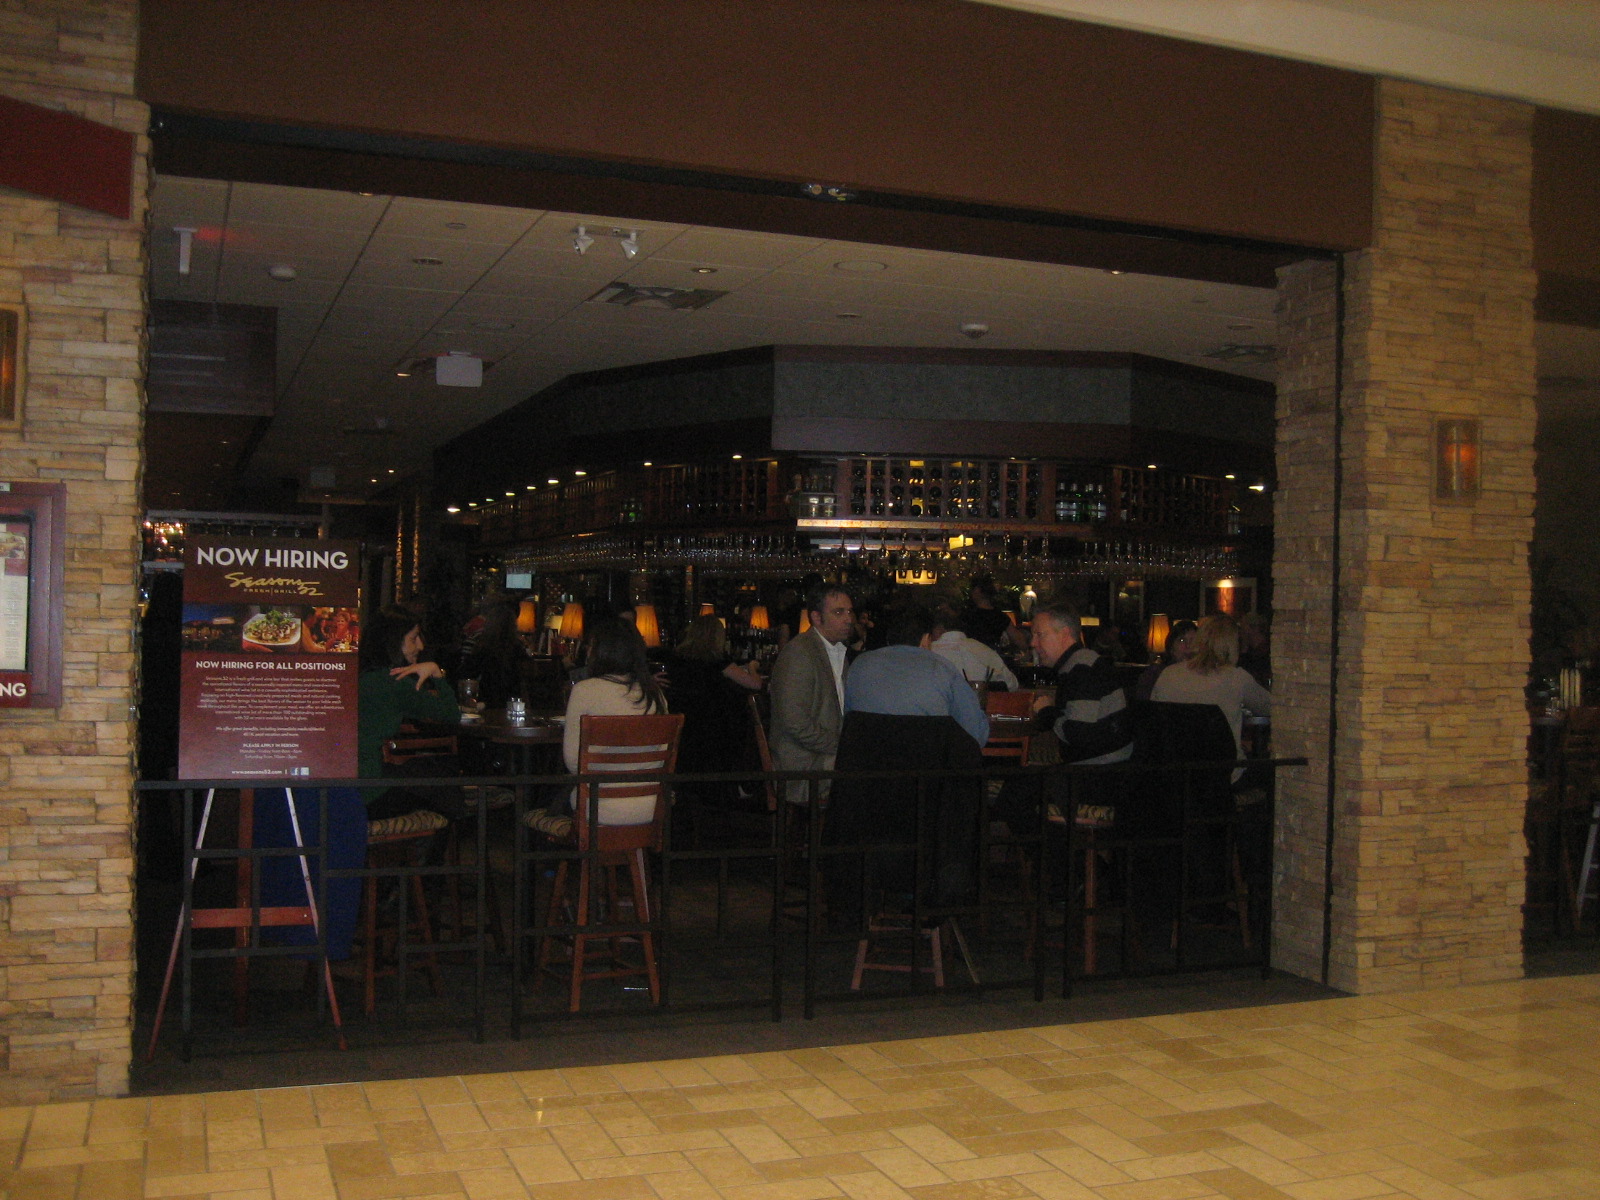 The Cheesecake Factory Restaurant in Tysons Galleria